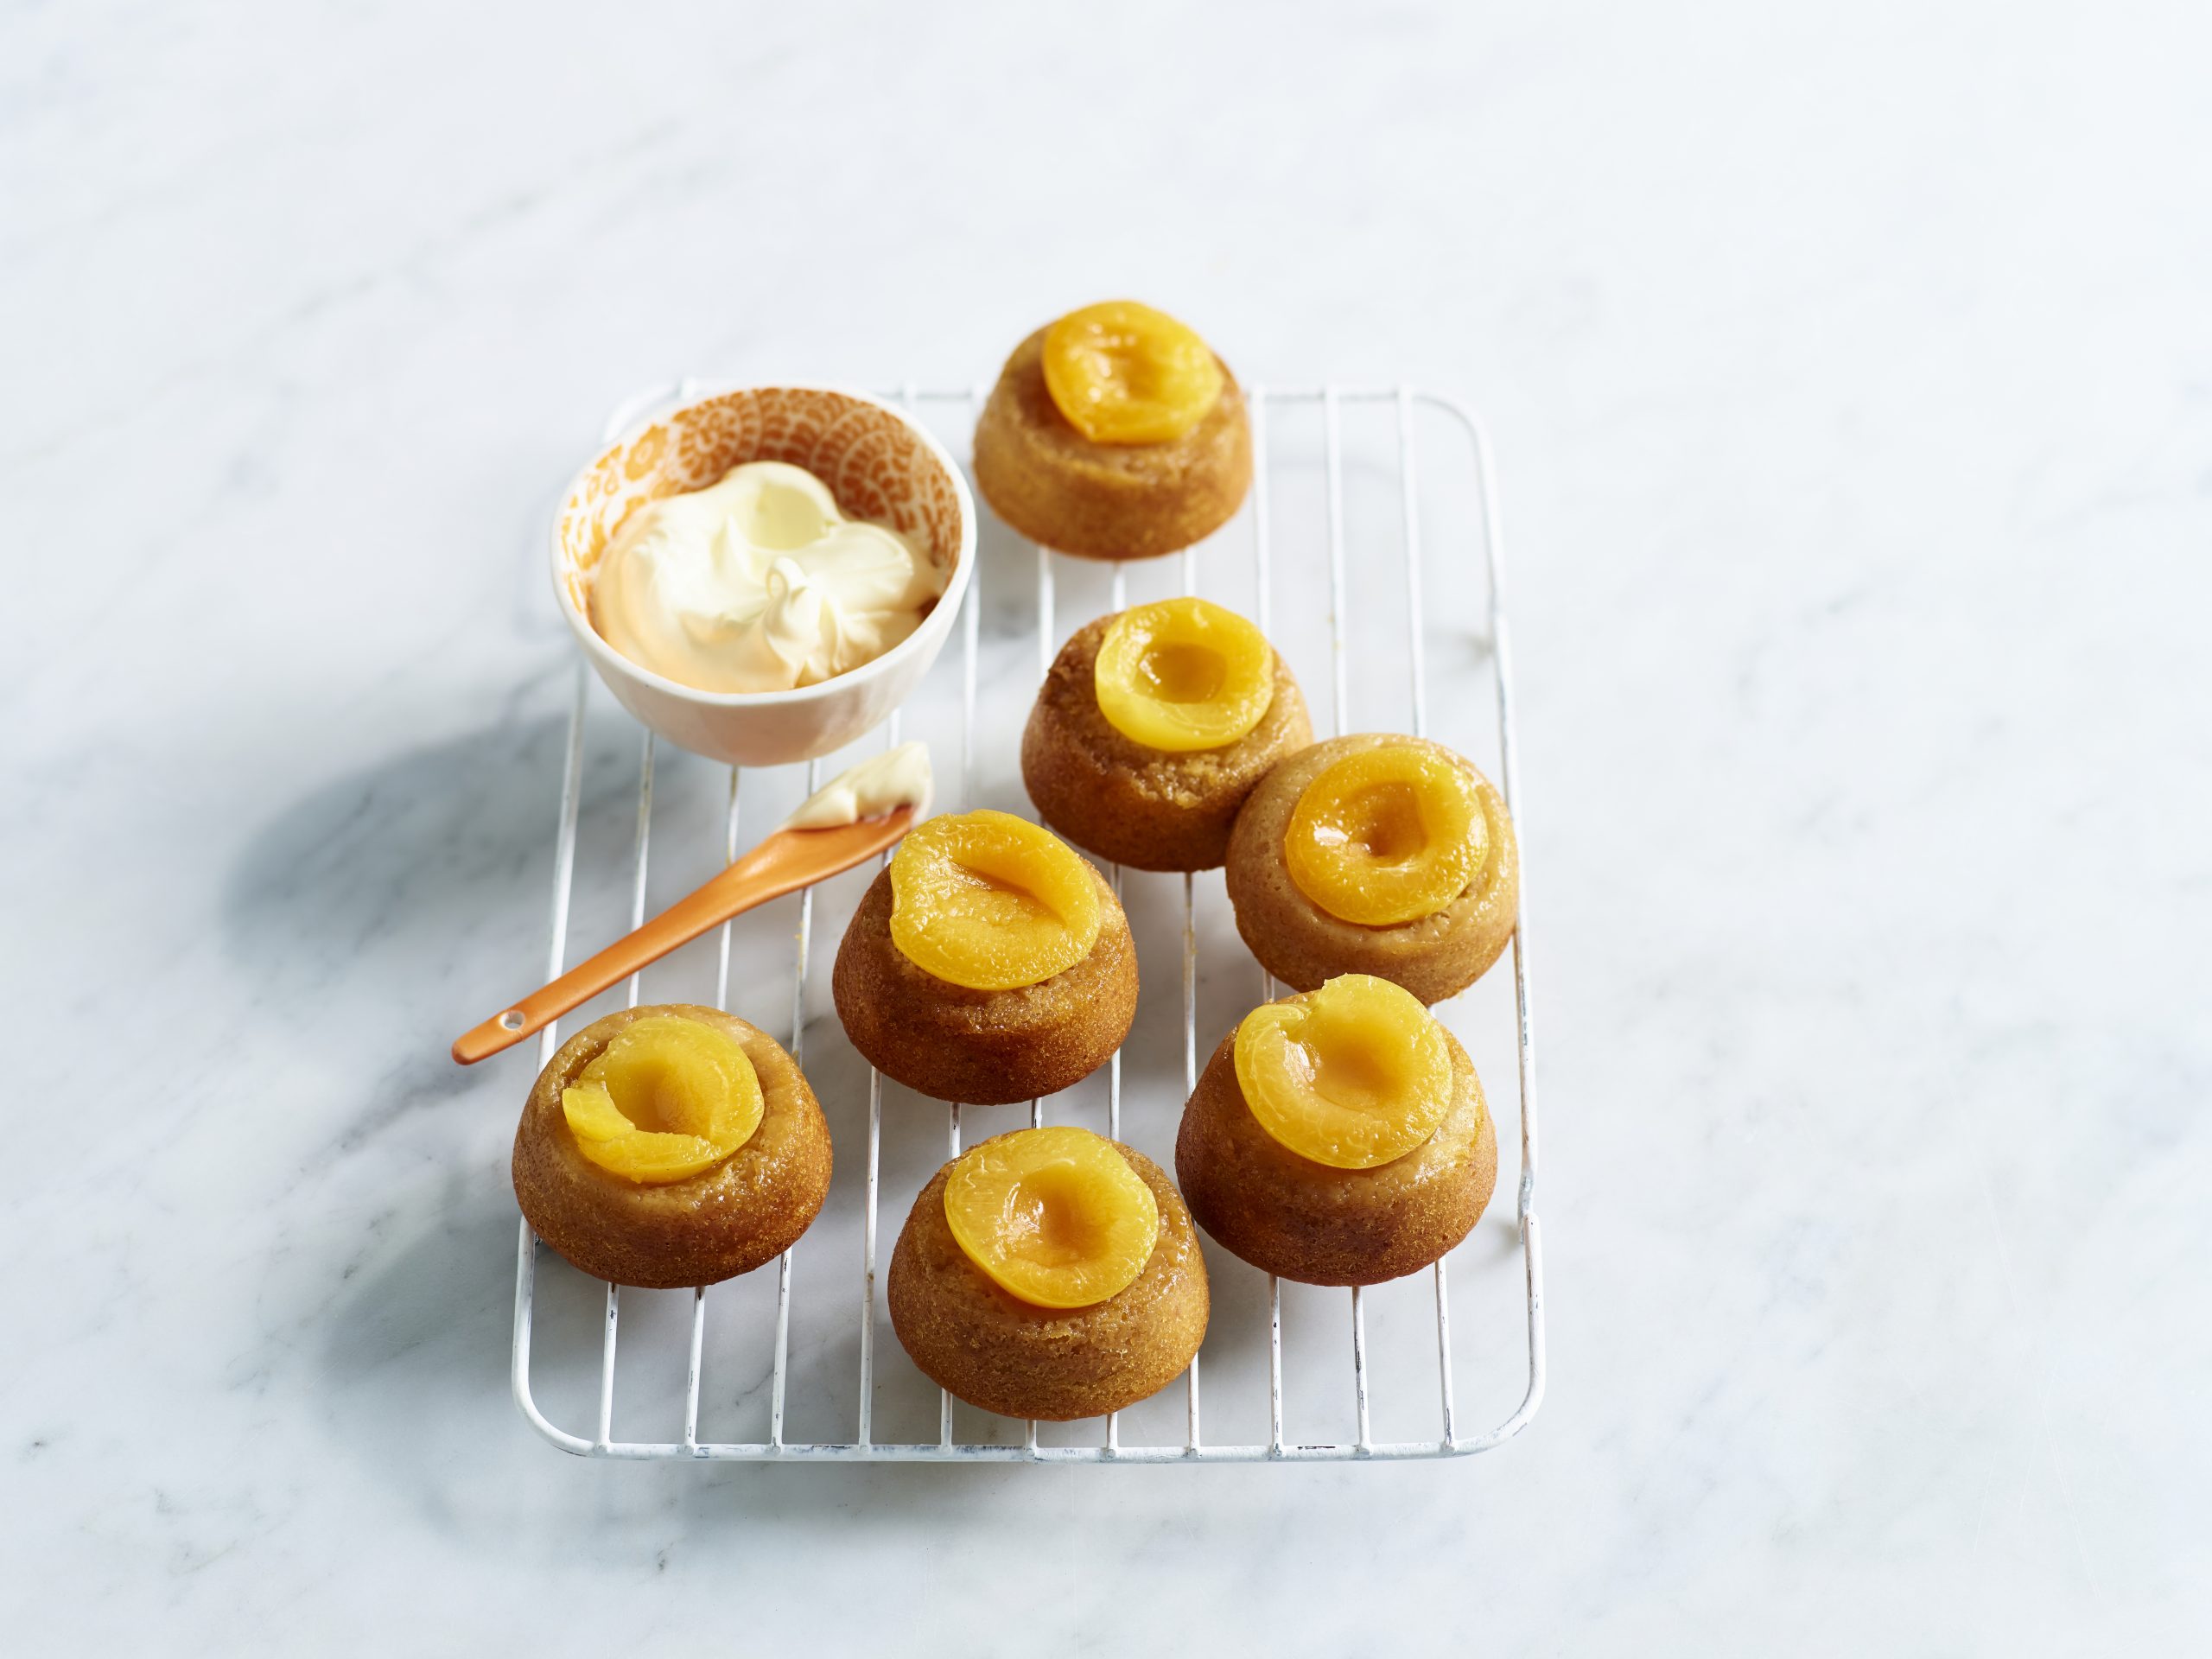 Apricot ’n’ Cream Upside-down Cakes